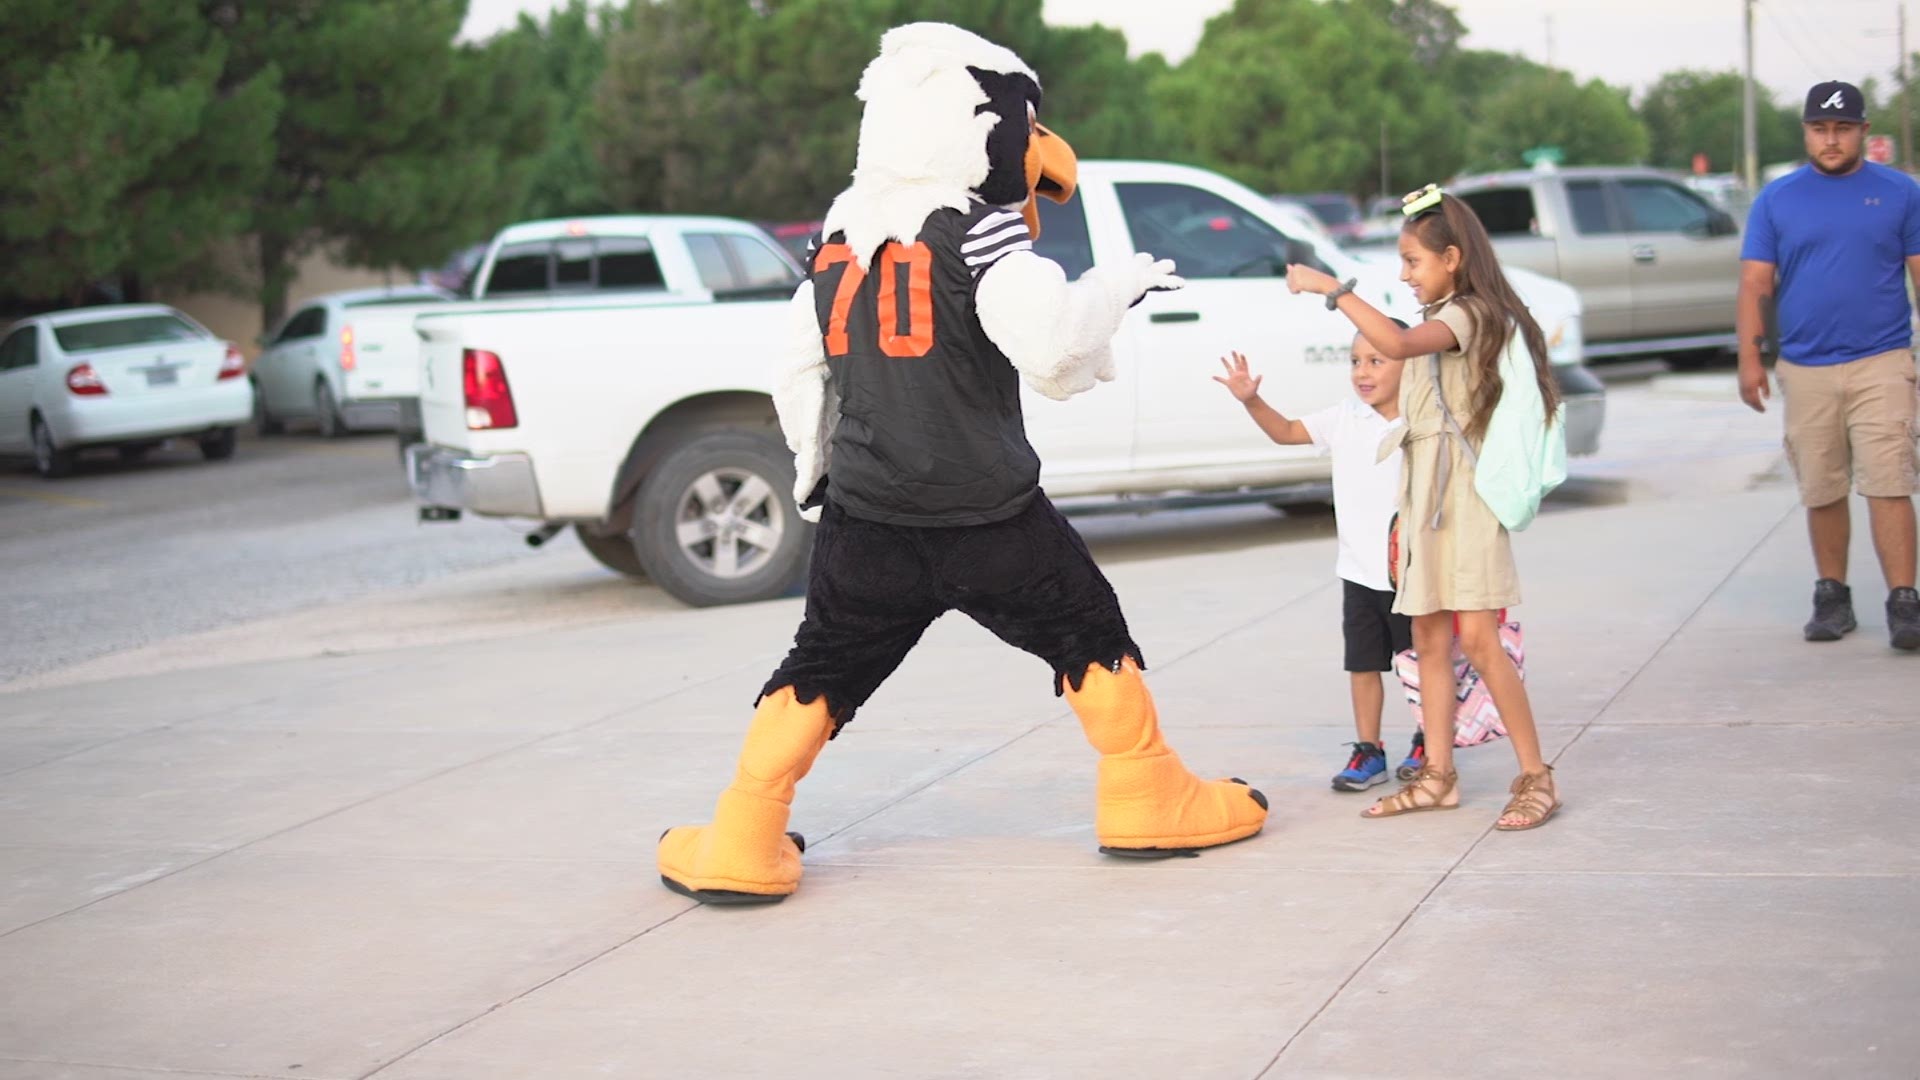 UTPB athletes, cheerleaders, and band members greet ECISD students on their first day of school.